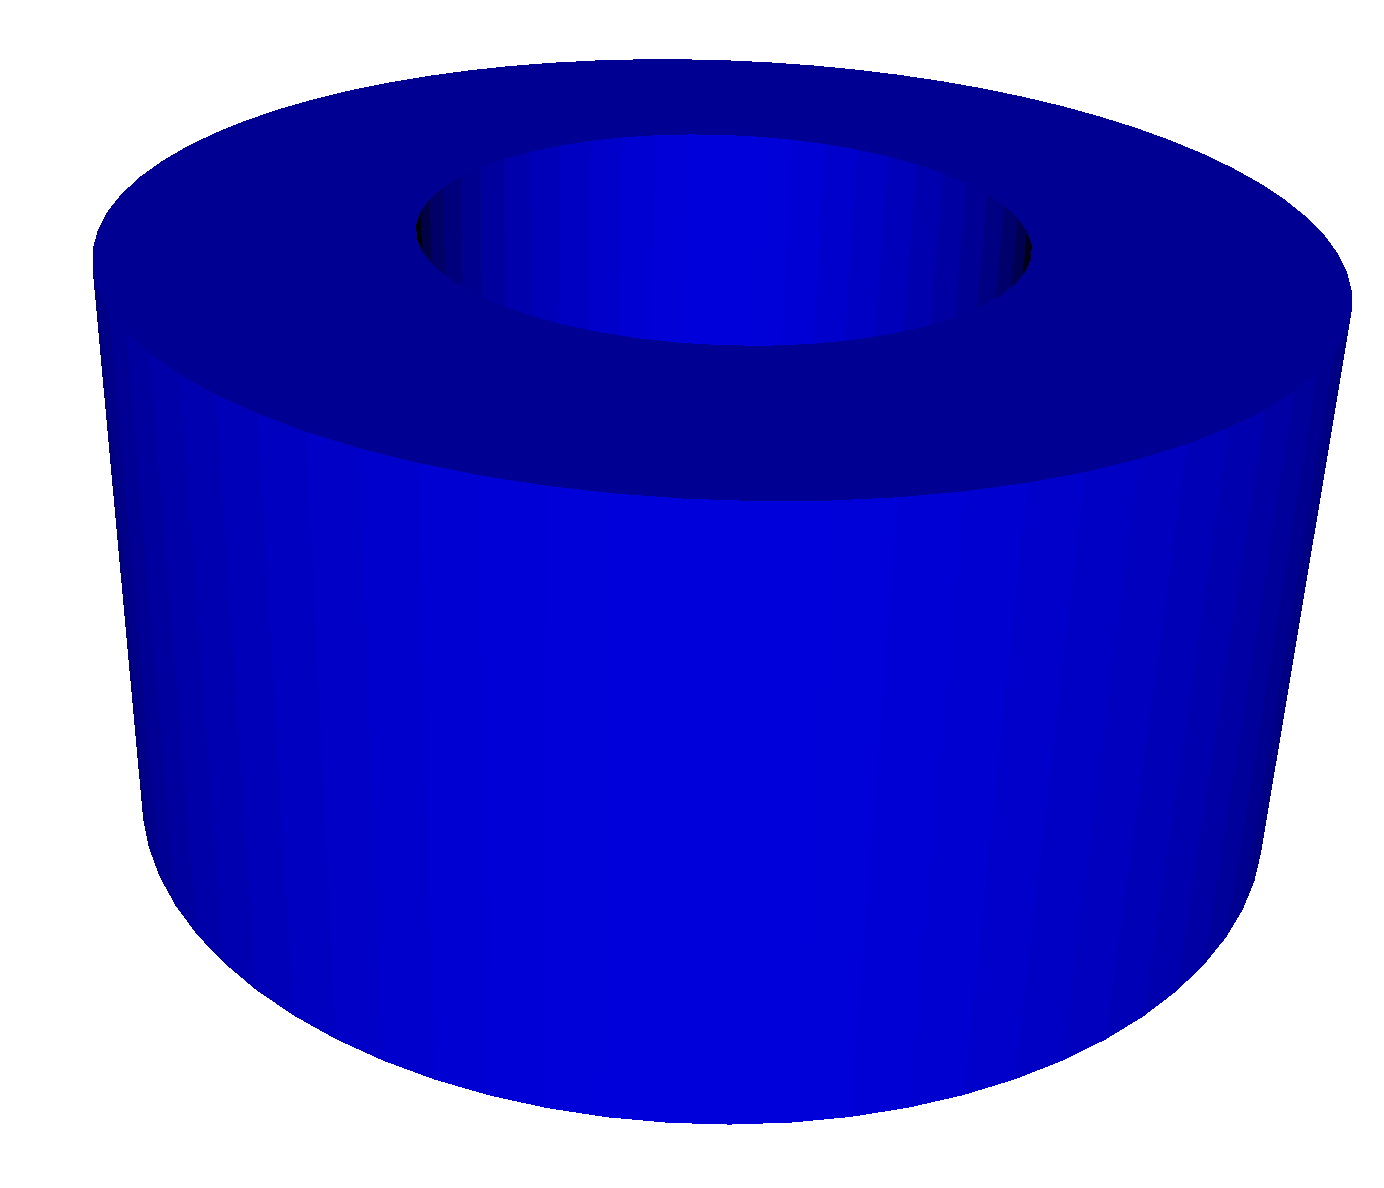 3D model of a cylinder with a circular hole, colored blue